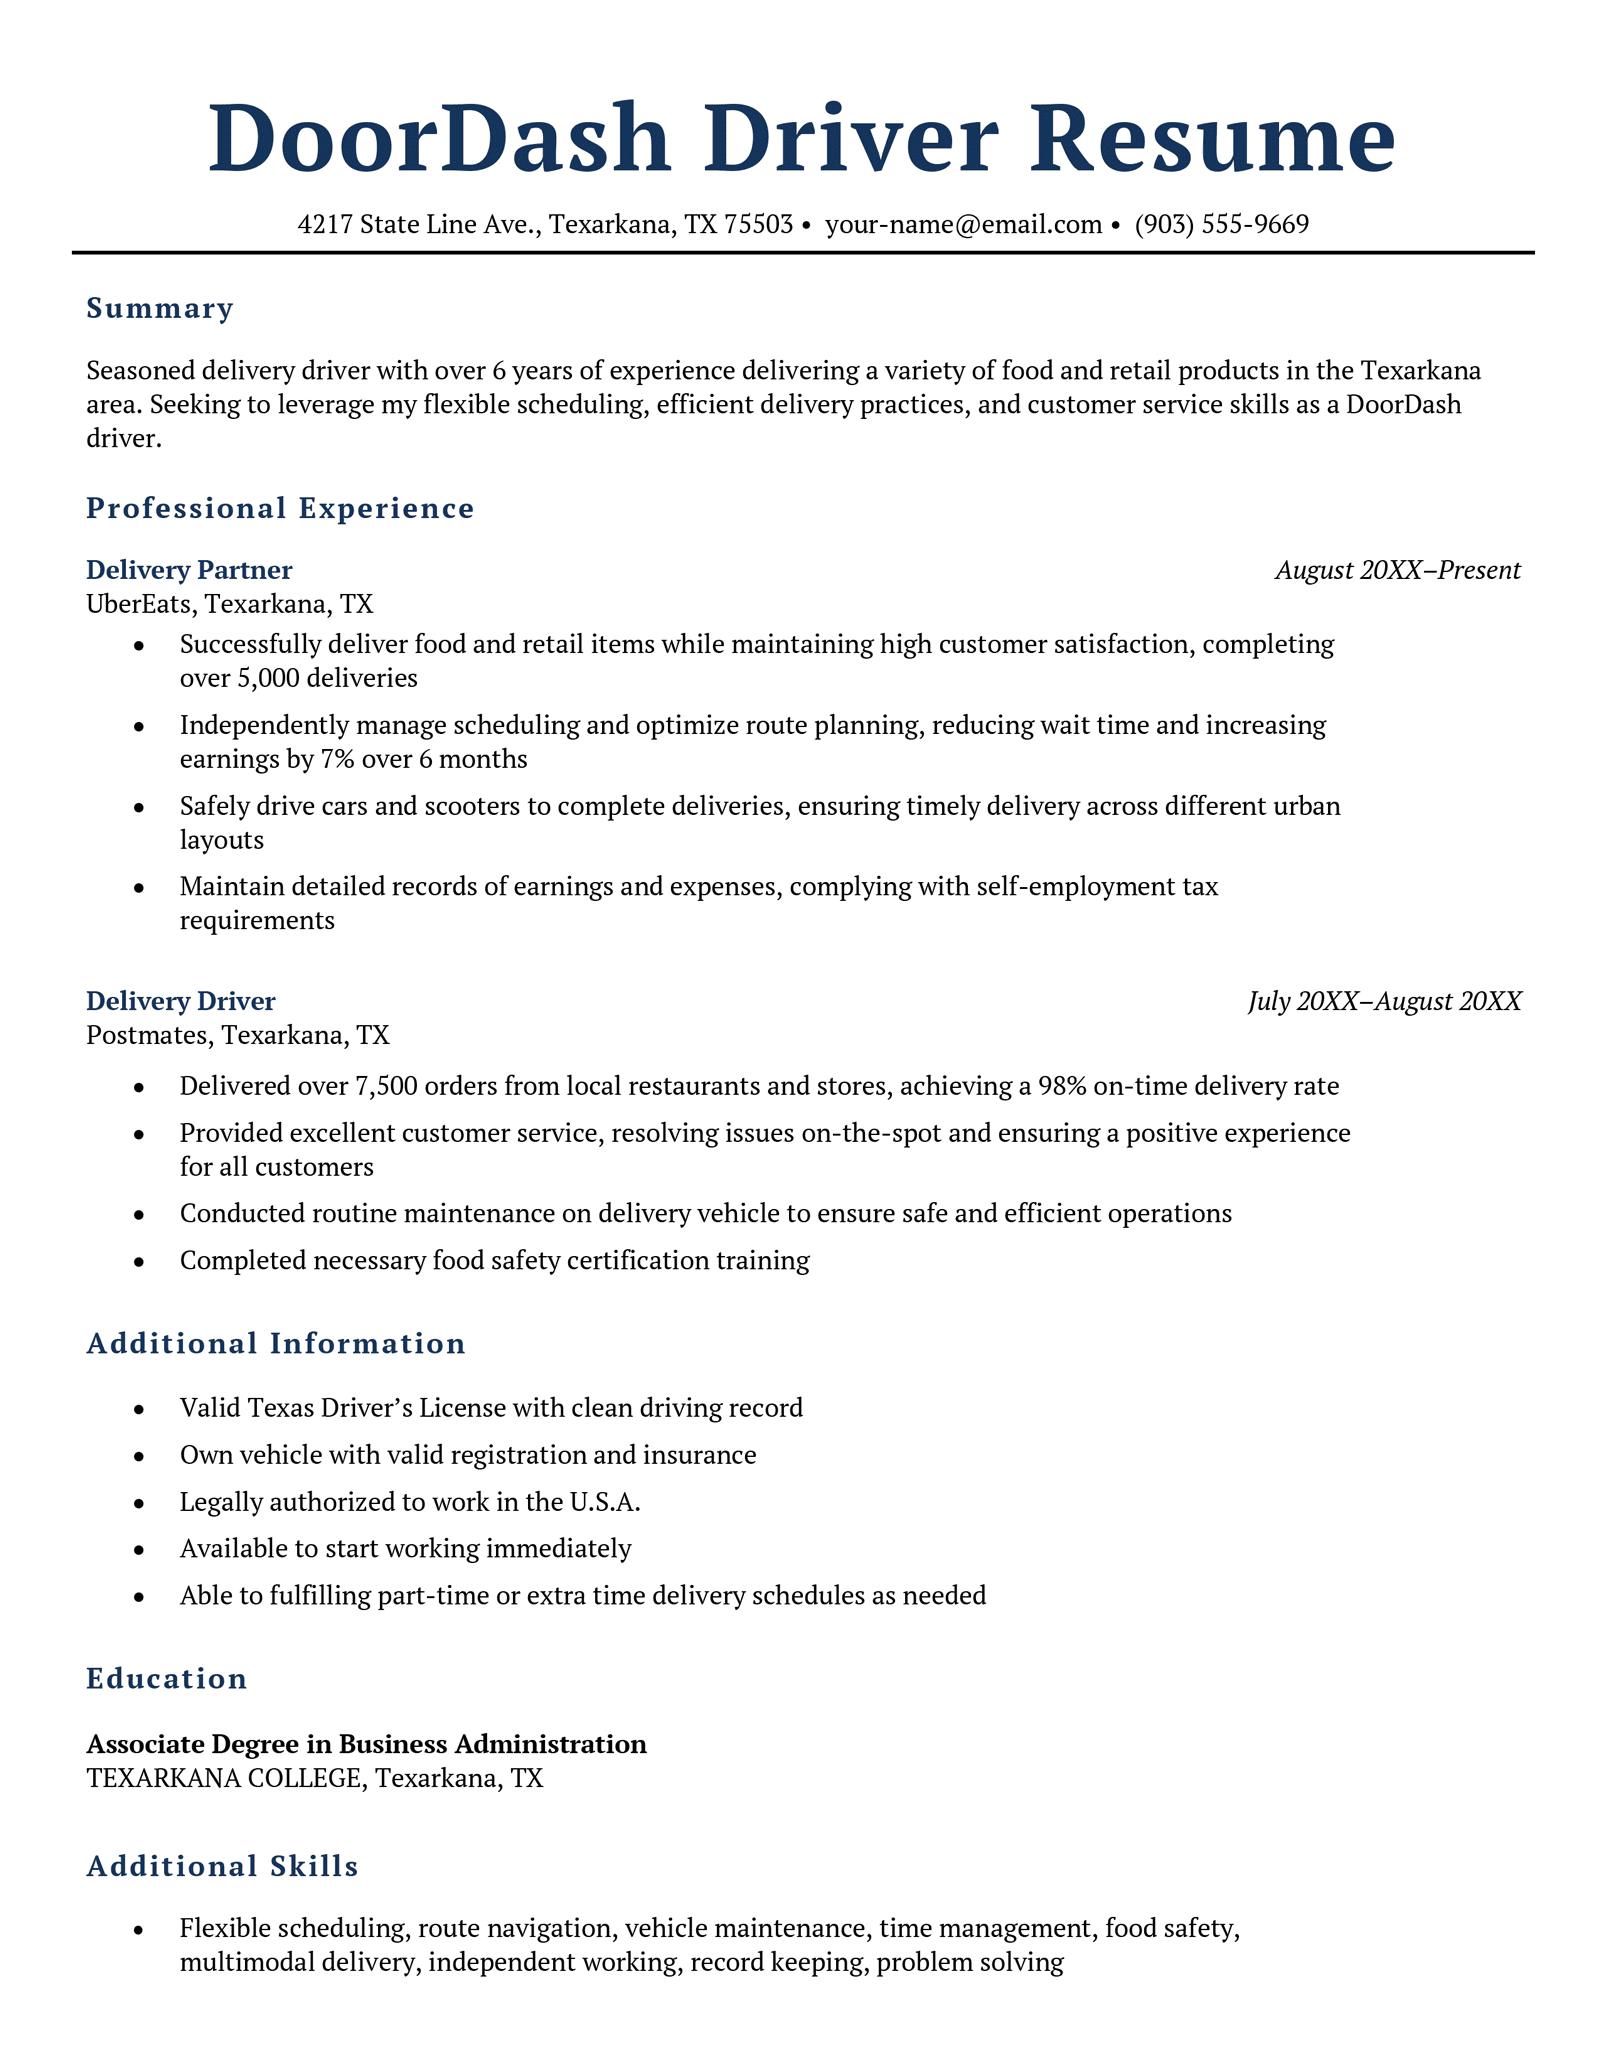 A DoorDash driver resume example that uses a blue color scheme and features a visually-pleasing amount of white space.